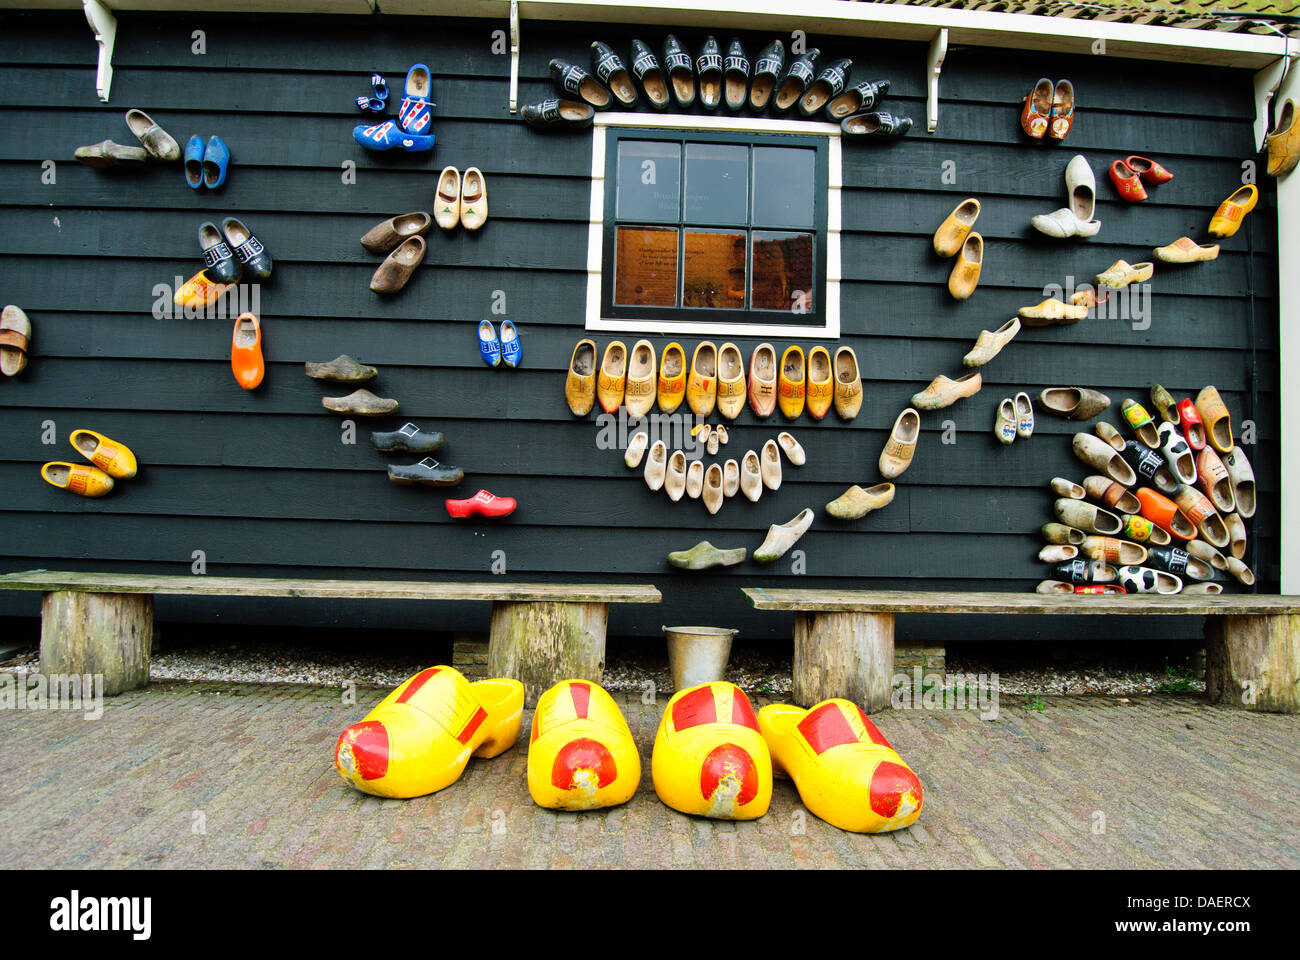 A shop wall full of Dutch wooden shoes Stock Photo